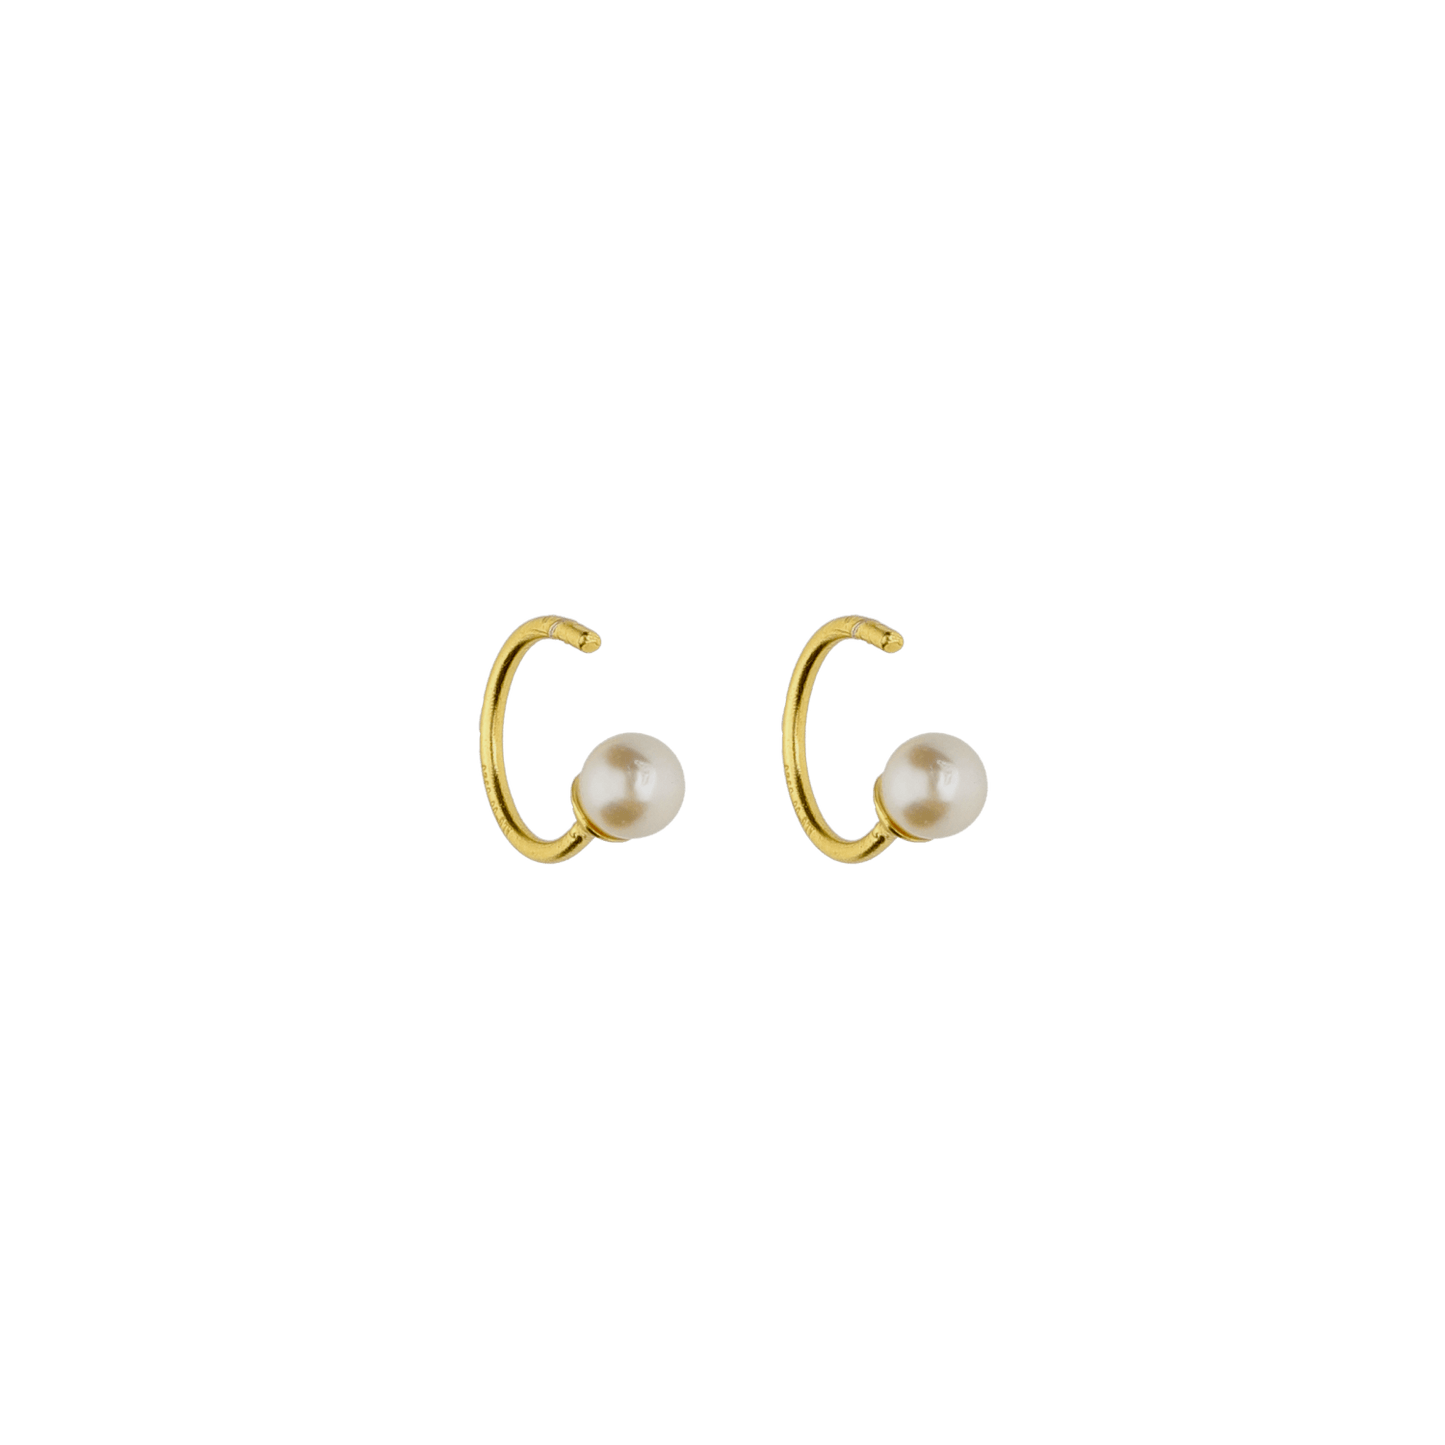 Earcuff ring with pearl